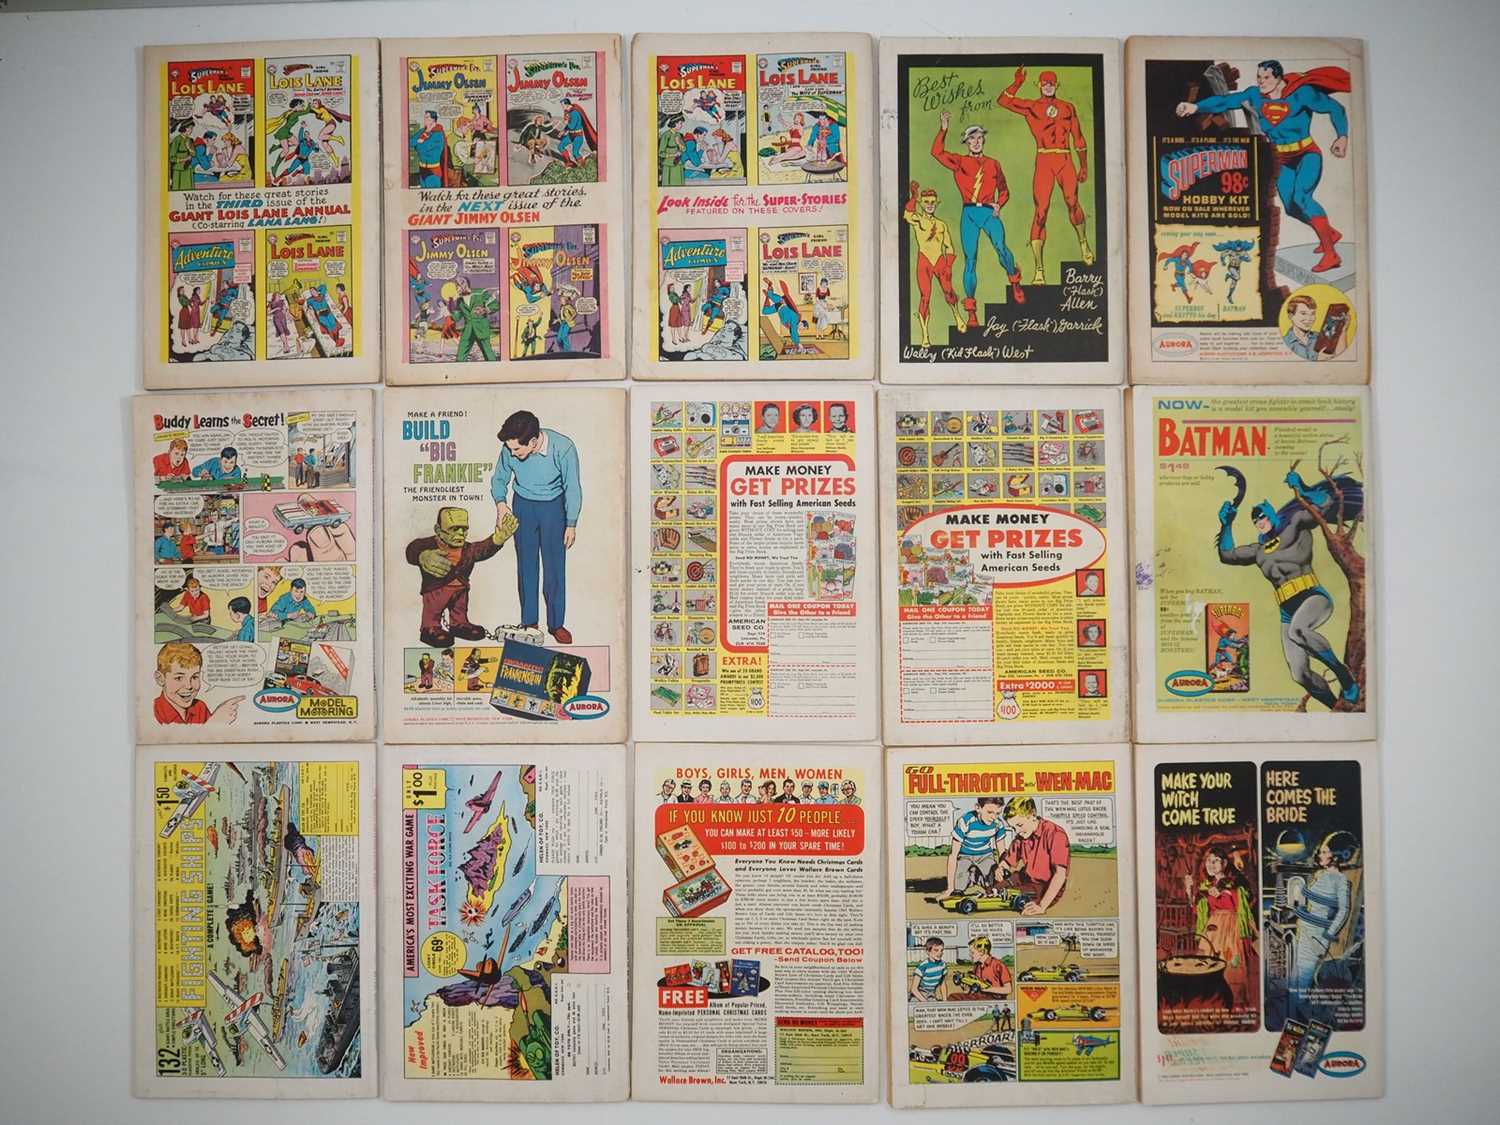 80 PG GIANT #1 to 15 (15 in Lot) - (1964/1965 - DC) - Full complete run of the initial 80 pg. - Image 2 of 2